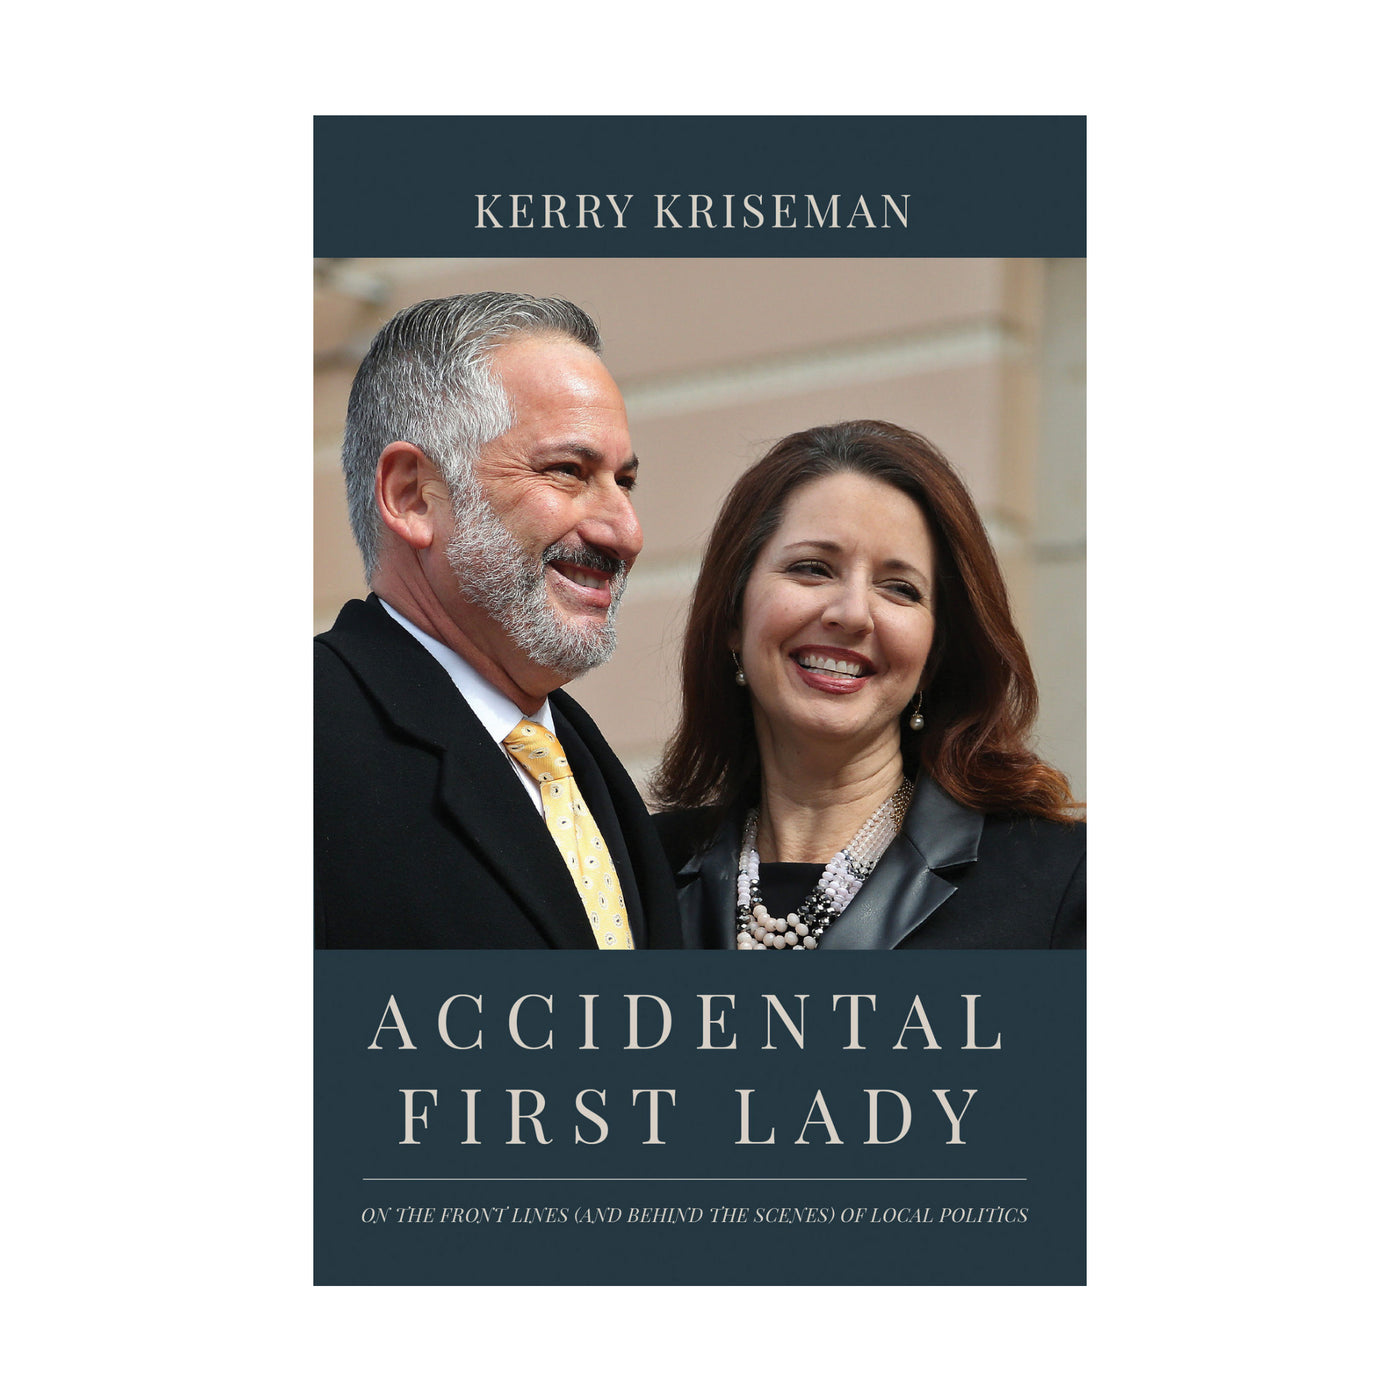 Accidental First Lady